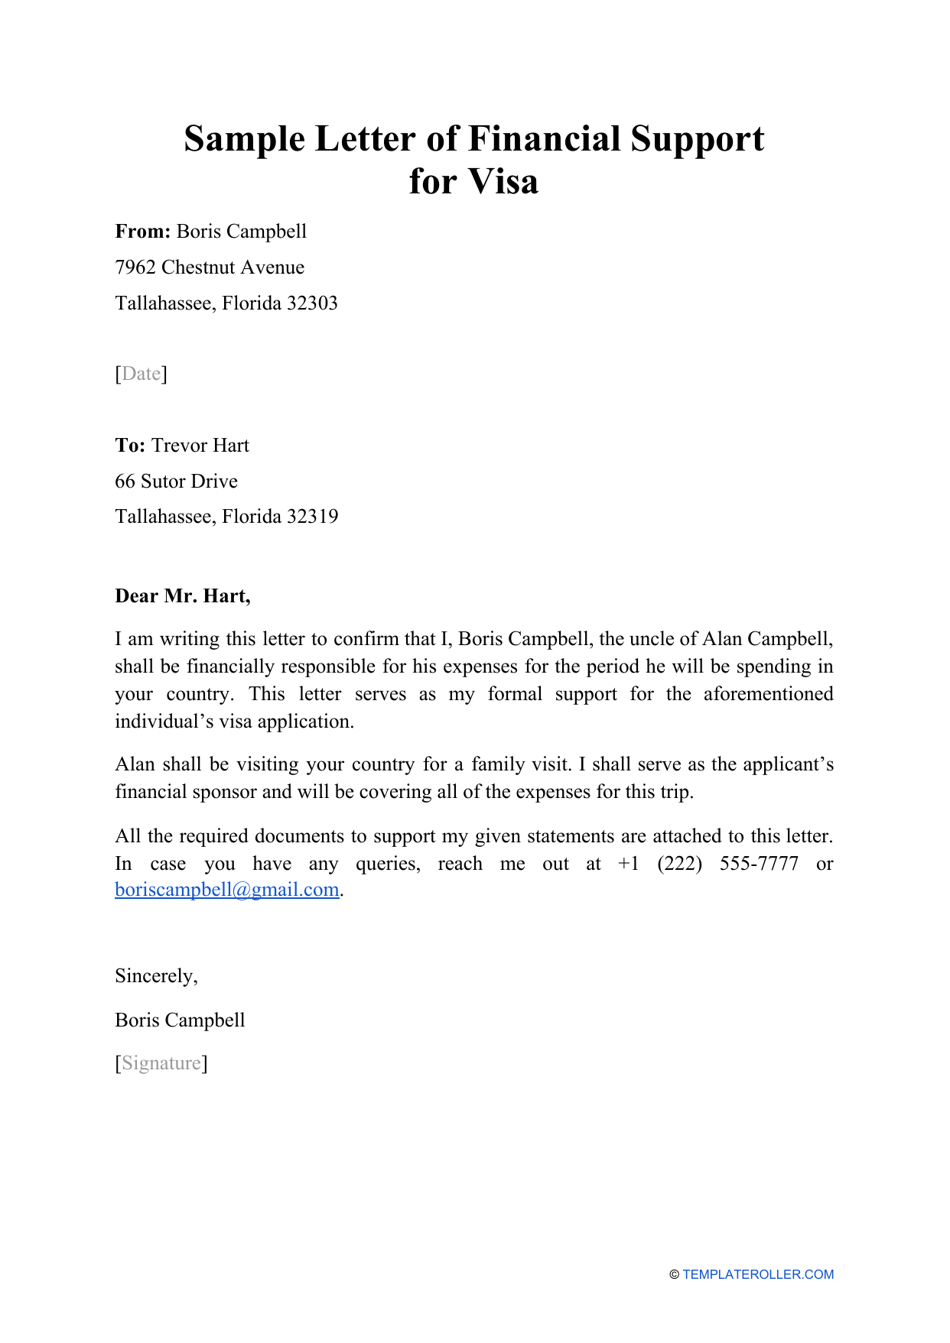 Sample Letter of Financial Support for Visa, Page 1